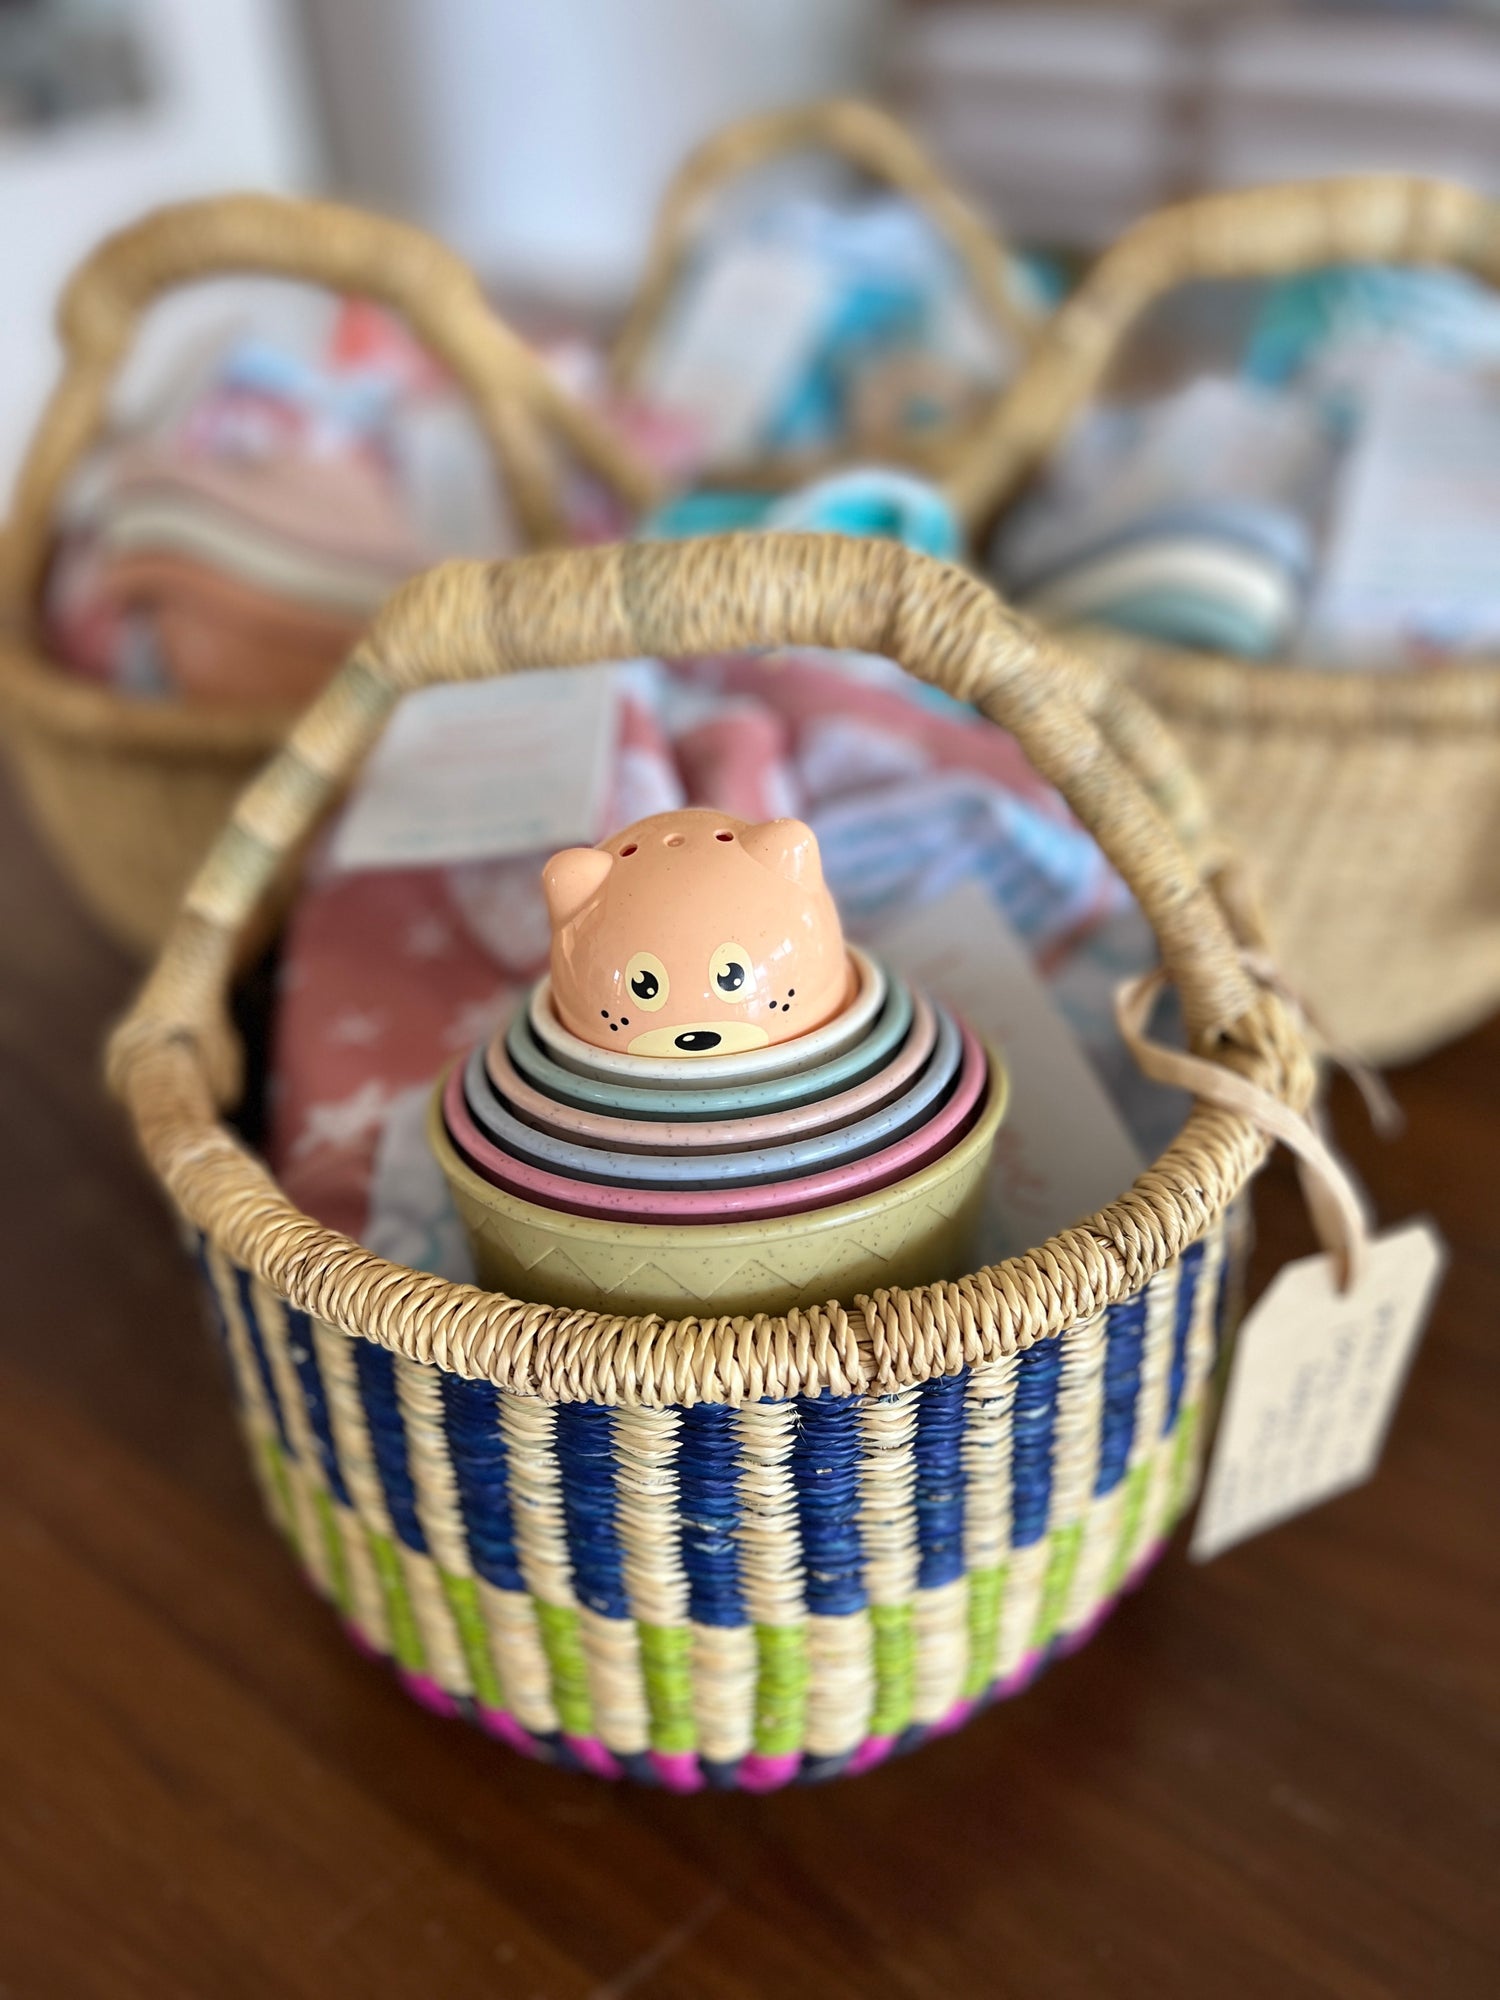 Baby and toddler swimwear woven gift baskets